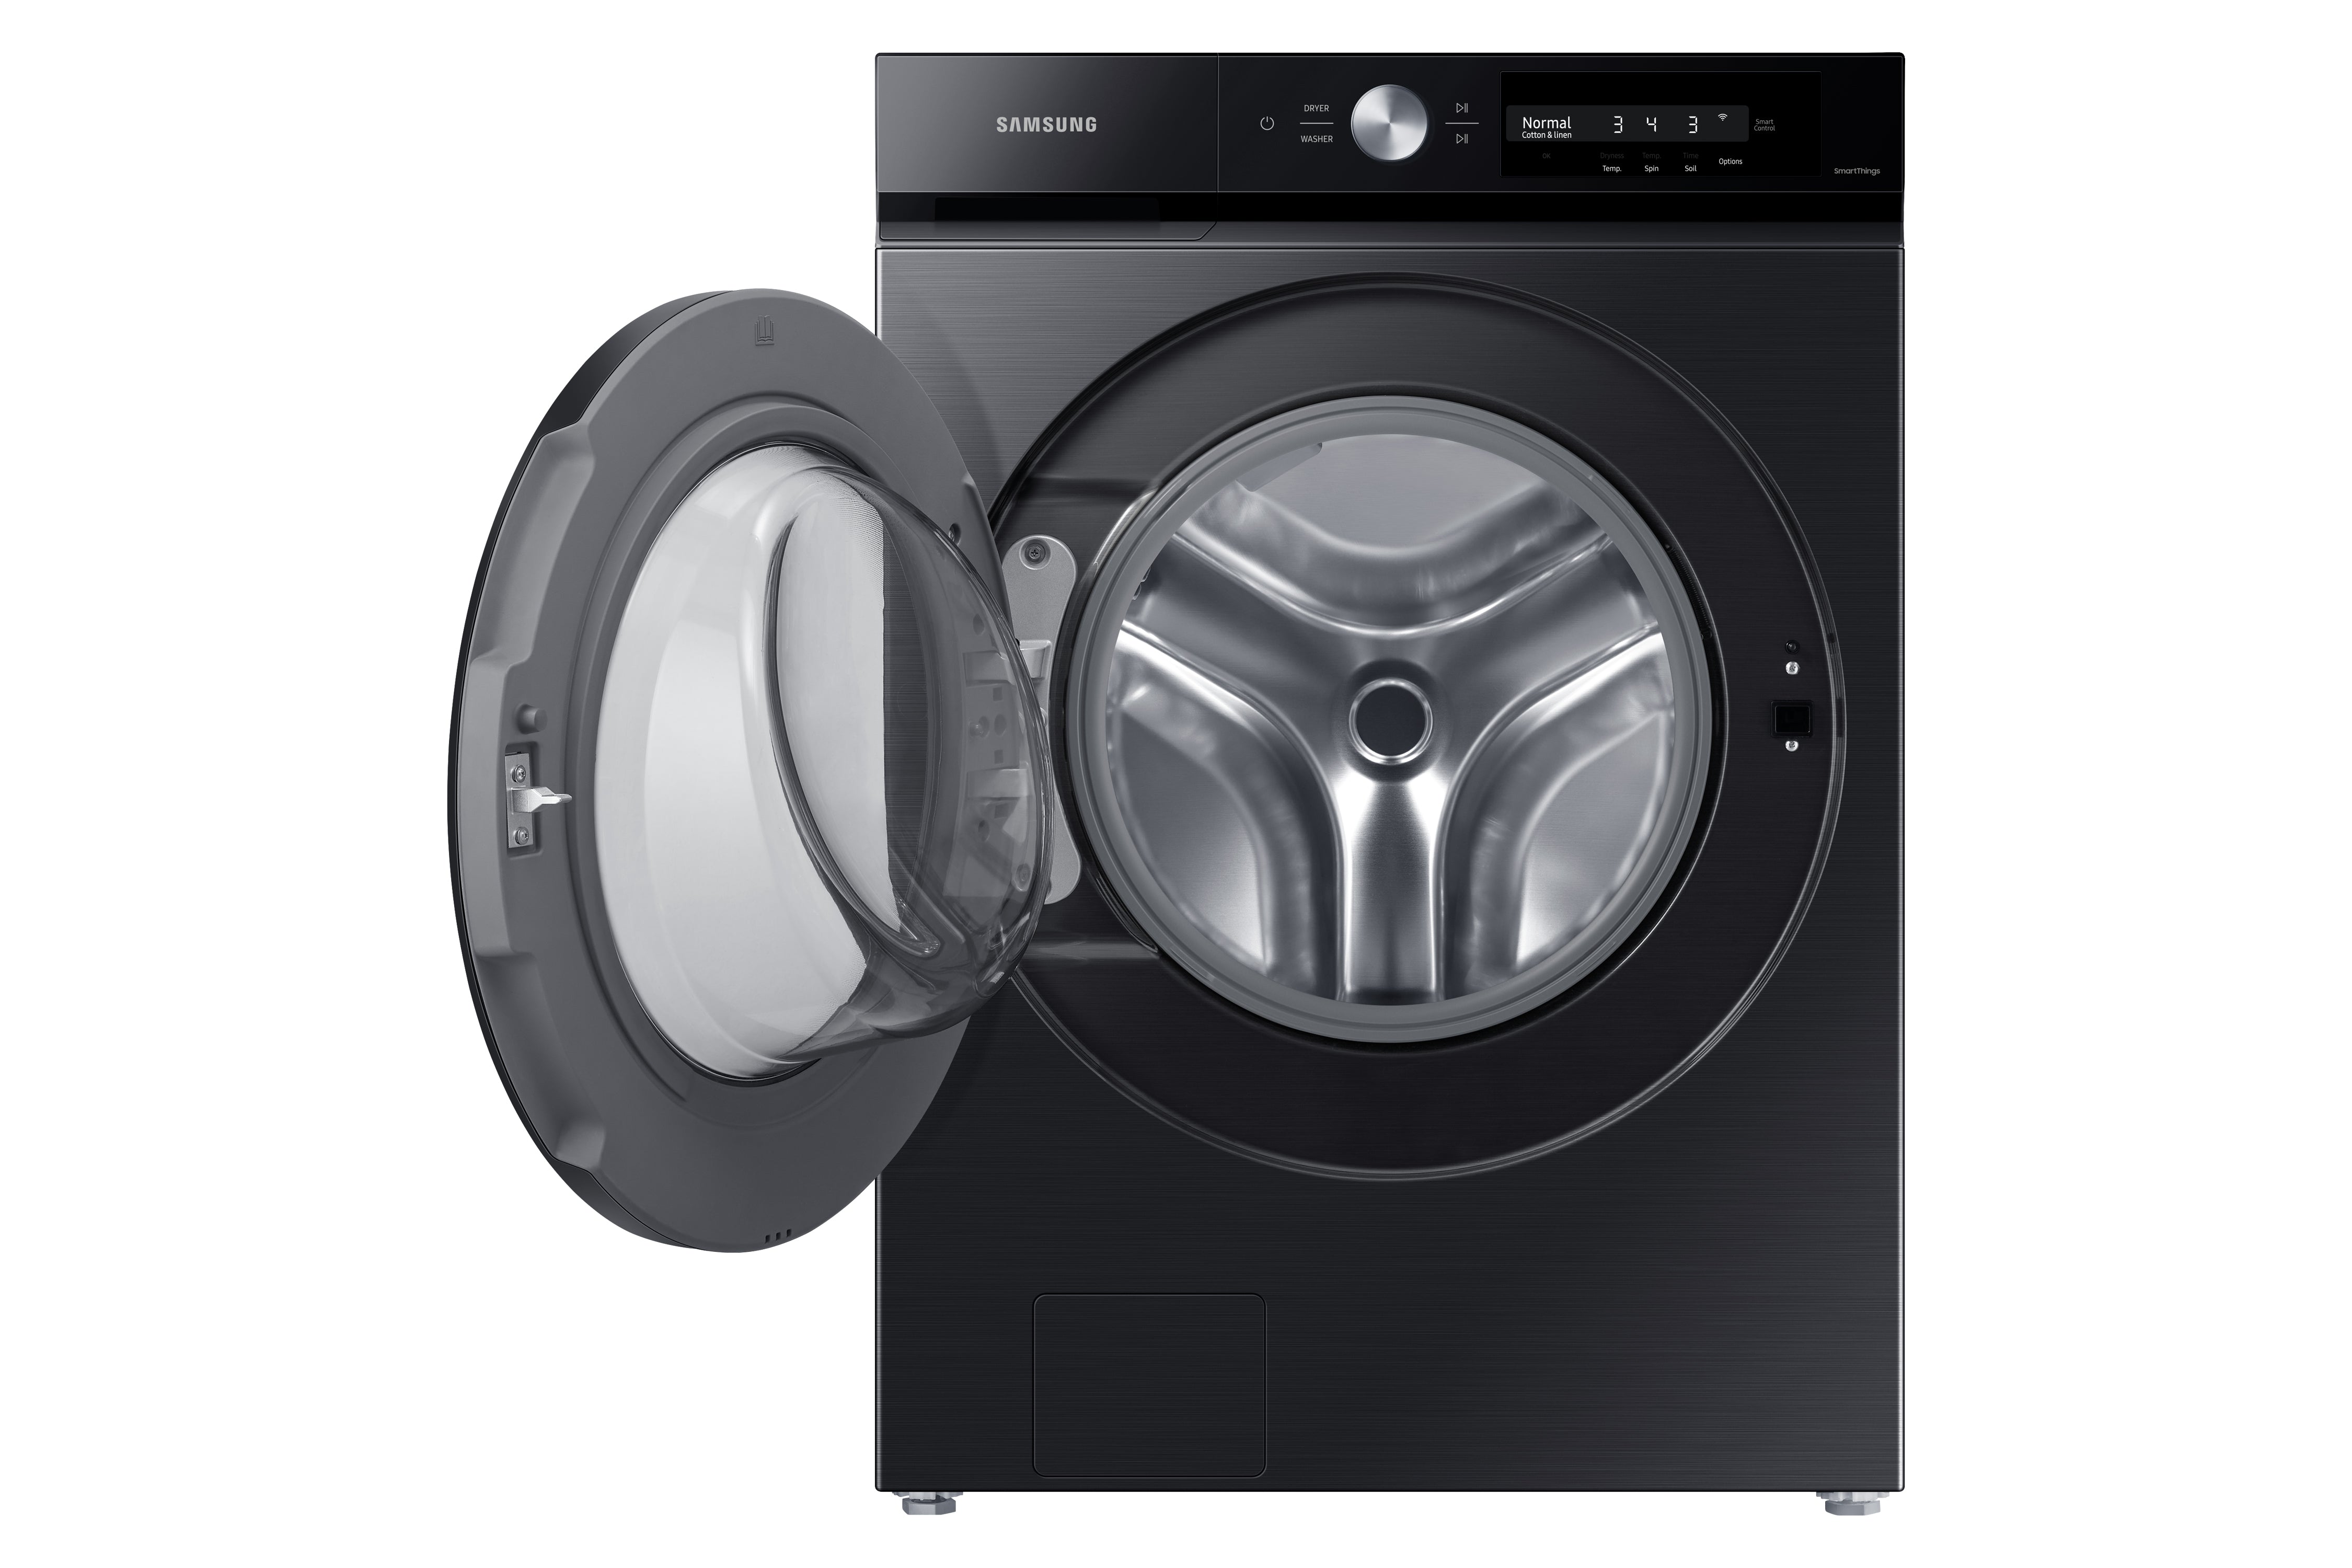 Samsung - Bespoke 5.3 cu. Ft  Front Load Washer in Black Stainless - WF46BB6700AVUS